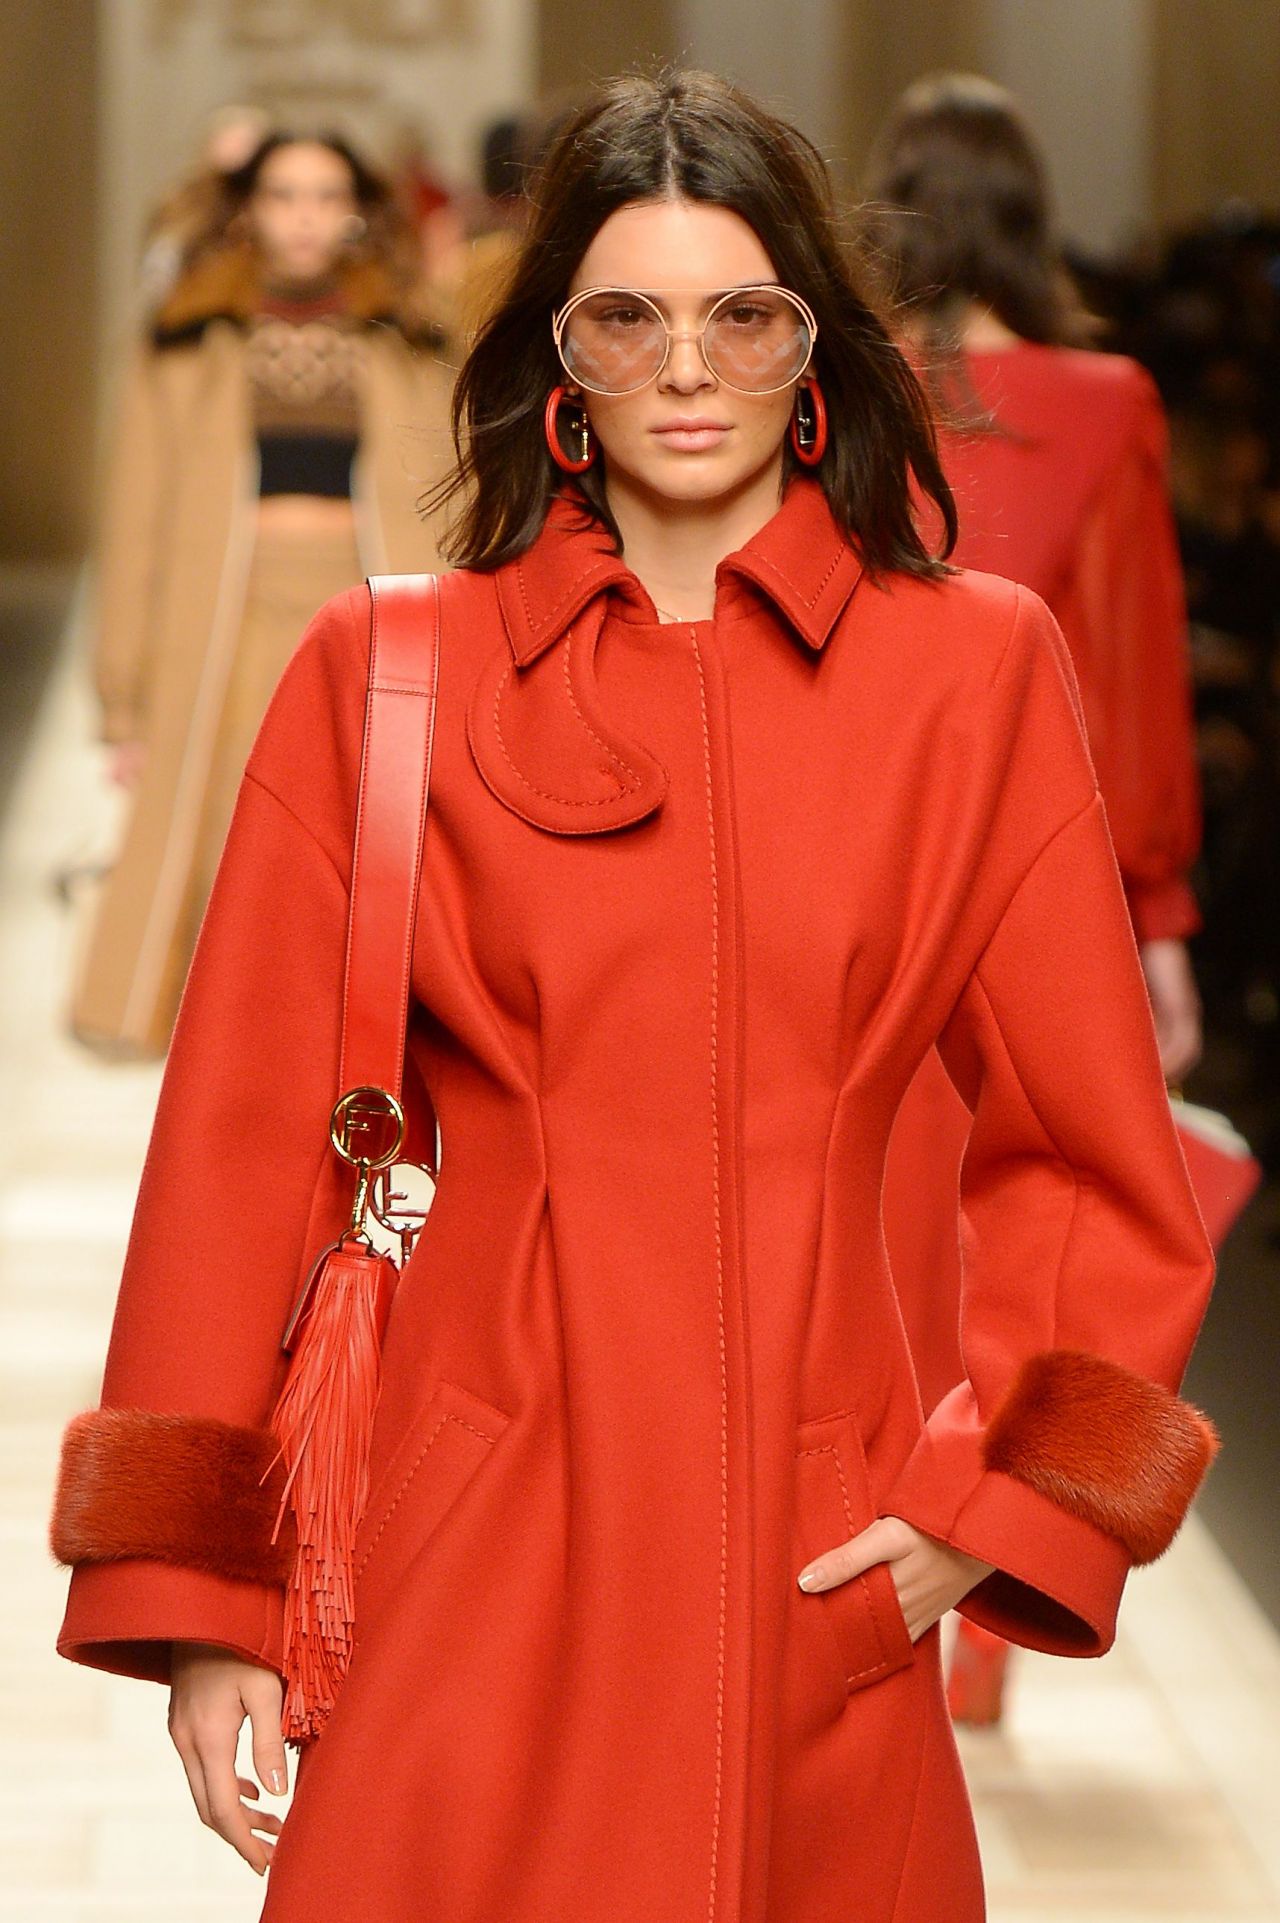 kendall jenner runway pictures